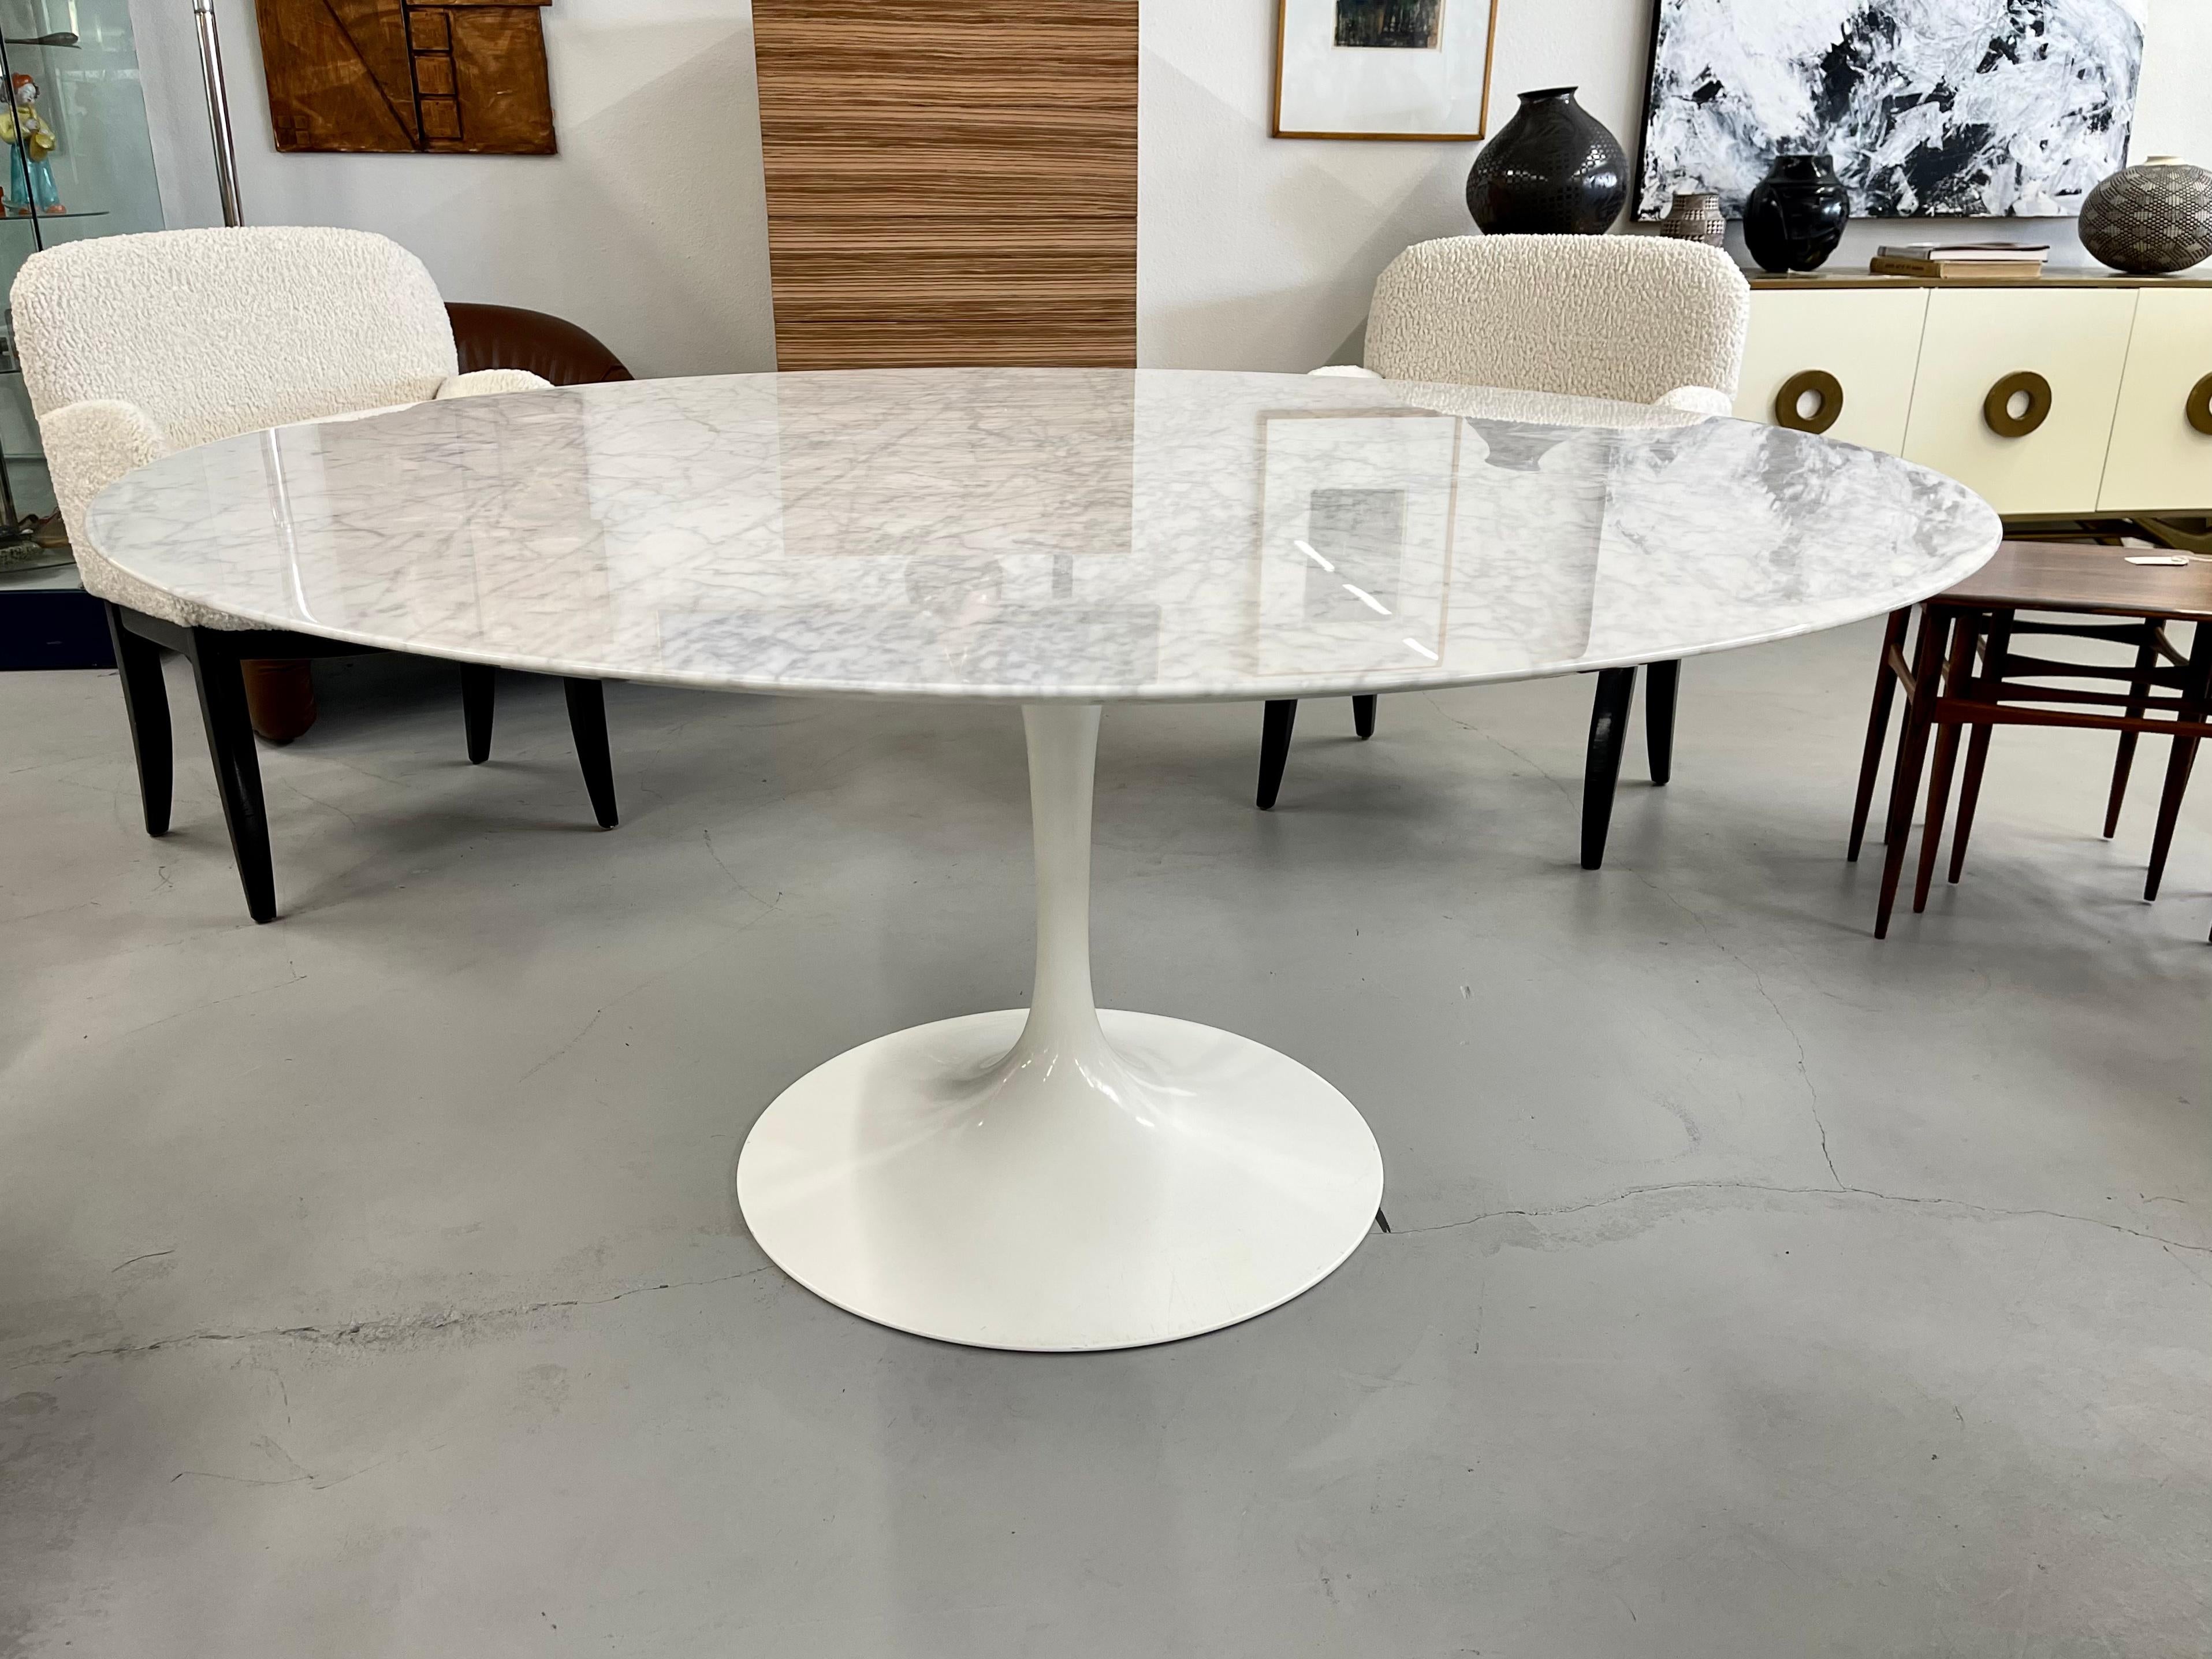 An Iconic design, this Knoll Saarinen marble dining table is labeled and dates to 2013. It is 60 inches un diameter and 28.5 inches tall. Not sure if this is Calacatta or Carrara. It is a bit scratched up and has a small repair to the rim which is